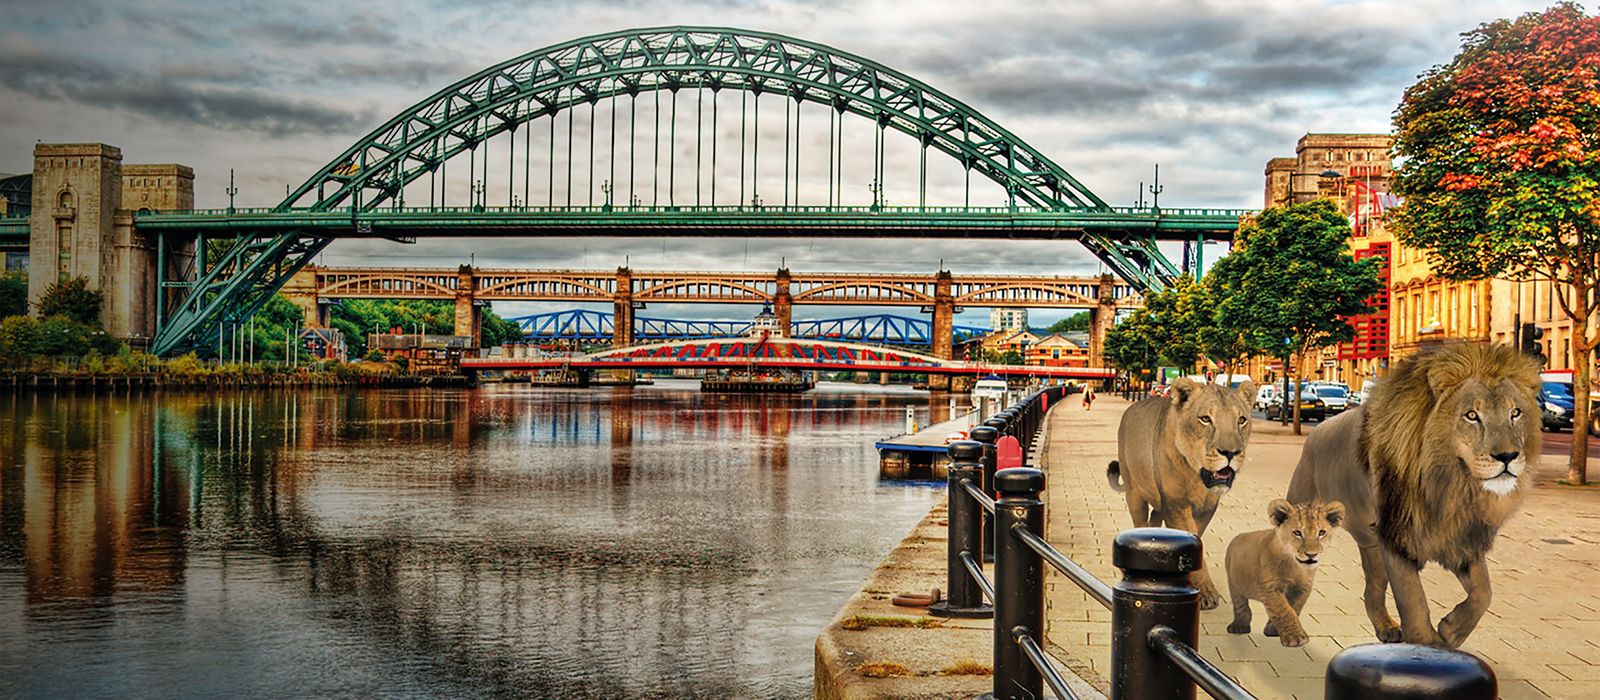 A photo showing illustrated lions walking over a bridge in Newcastle